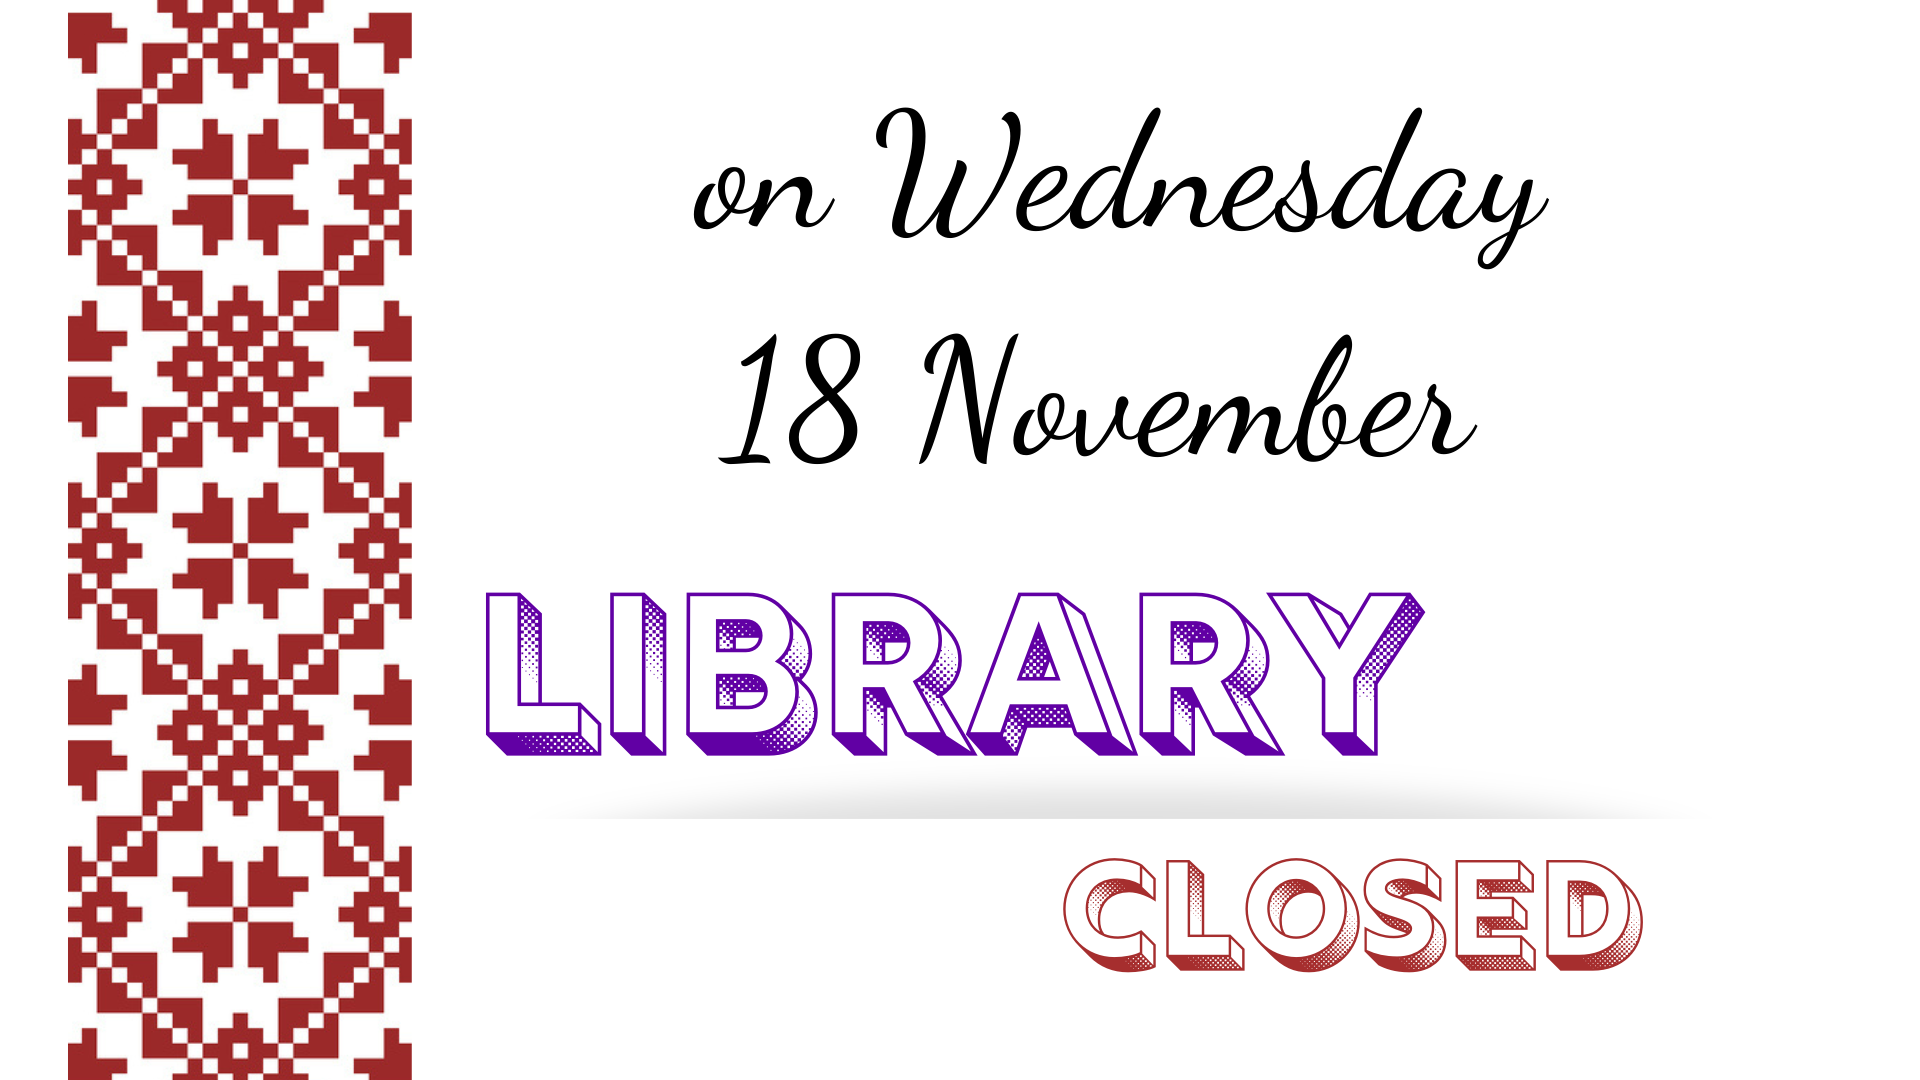 On Wednesday 18 November Library closed.